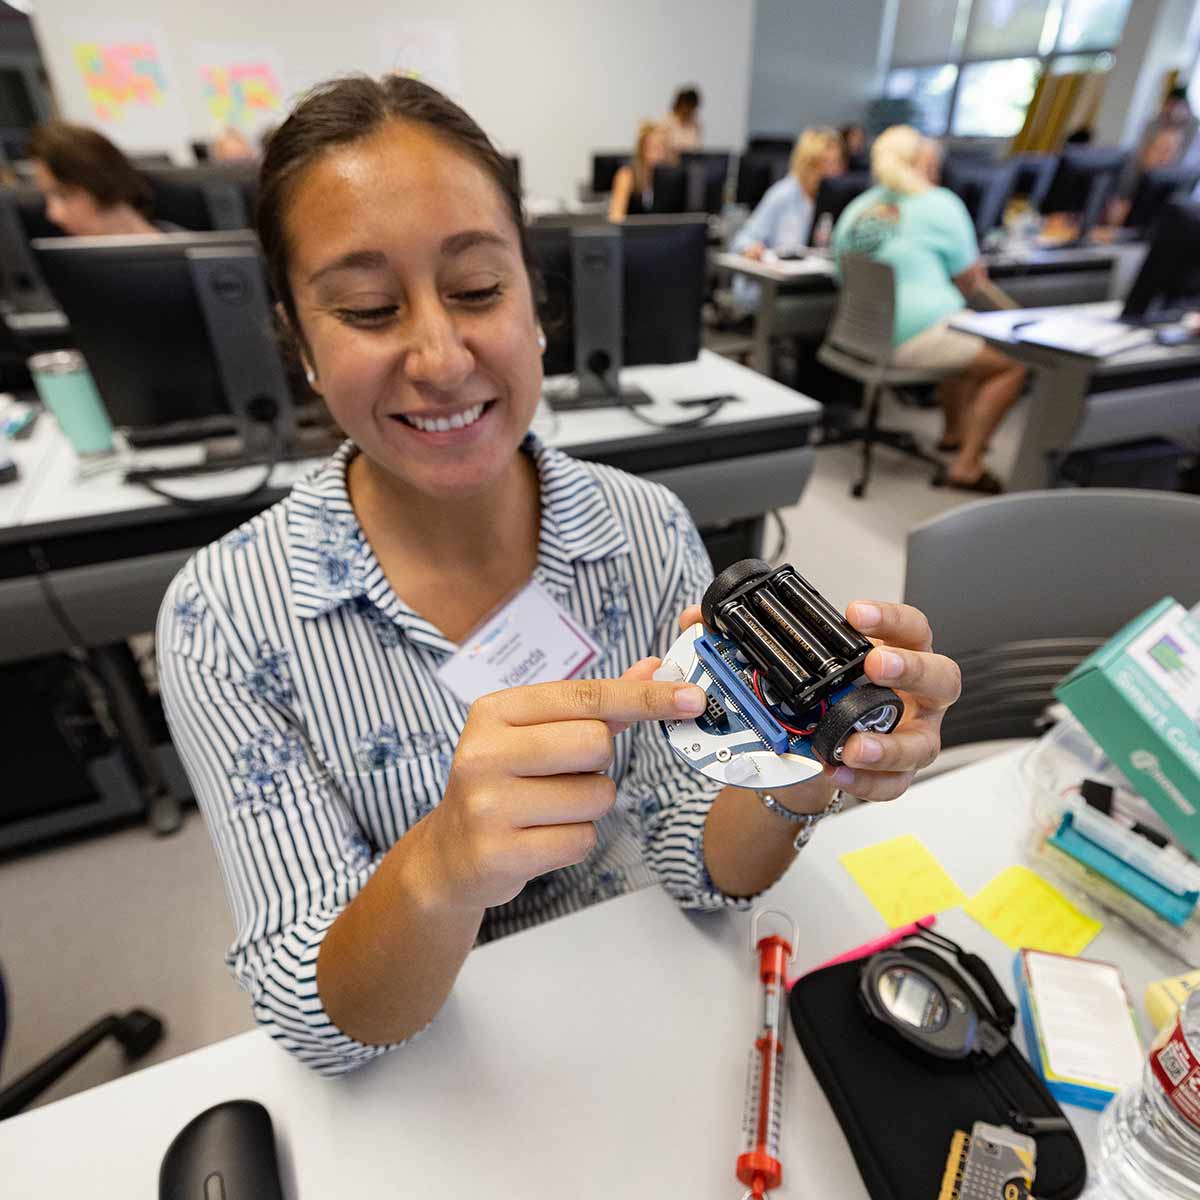 A smiling student holds a device during a computer science training workshop.